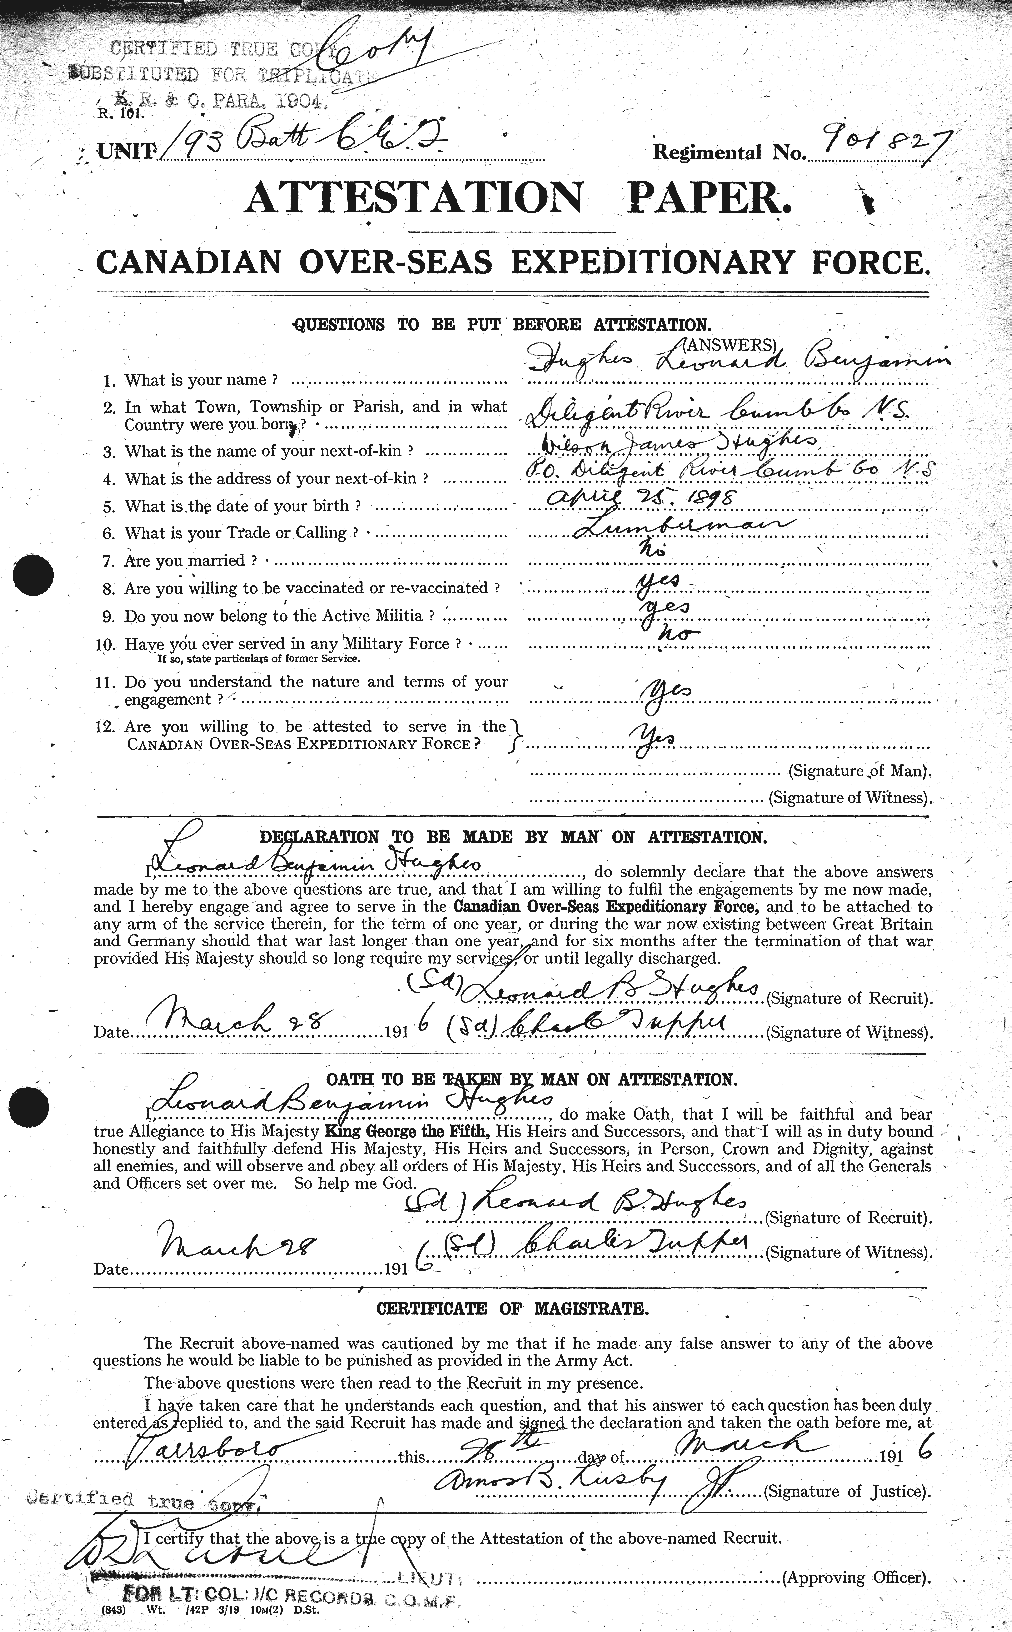 Personnel Records of the First World War - CEF 404099a